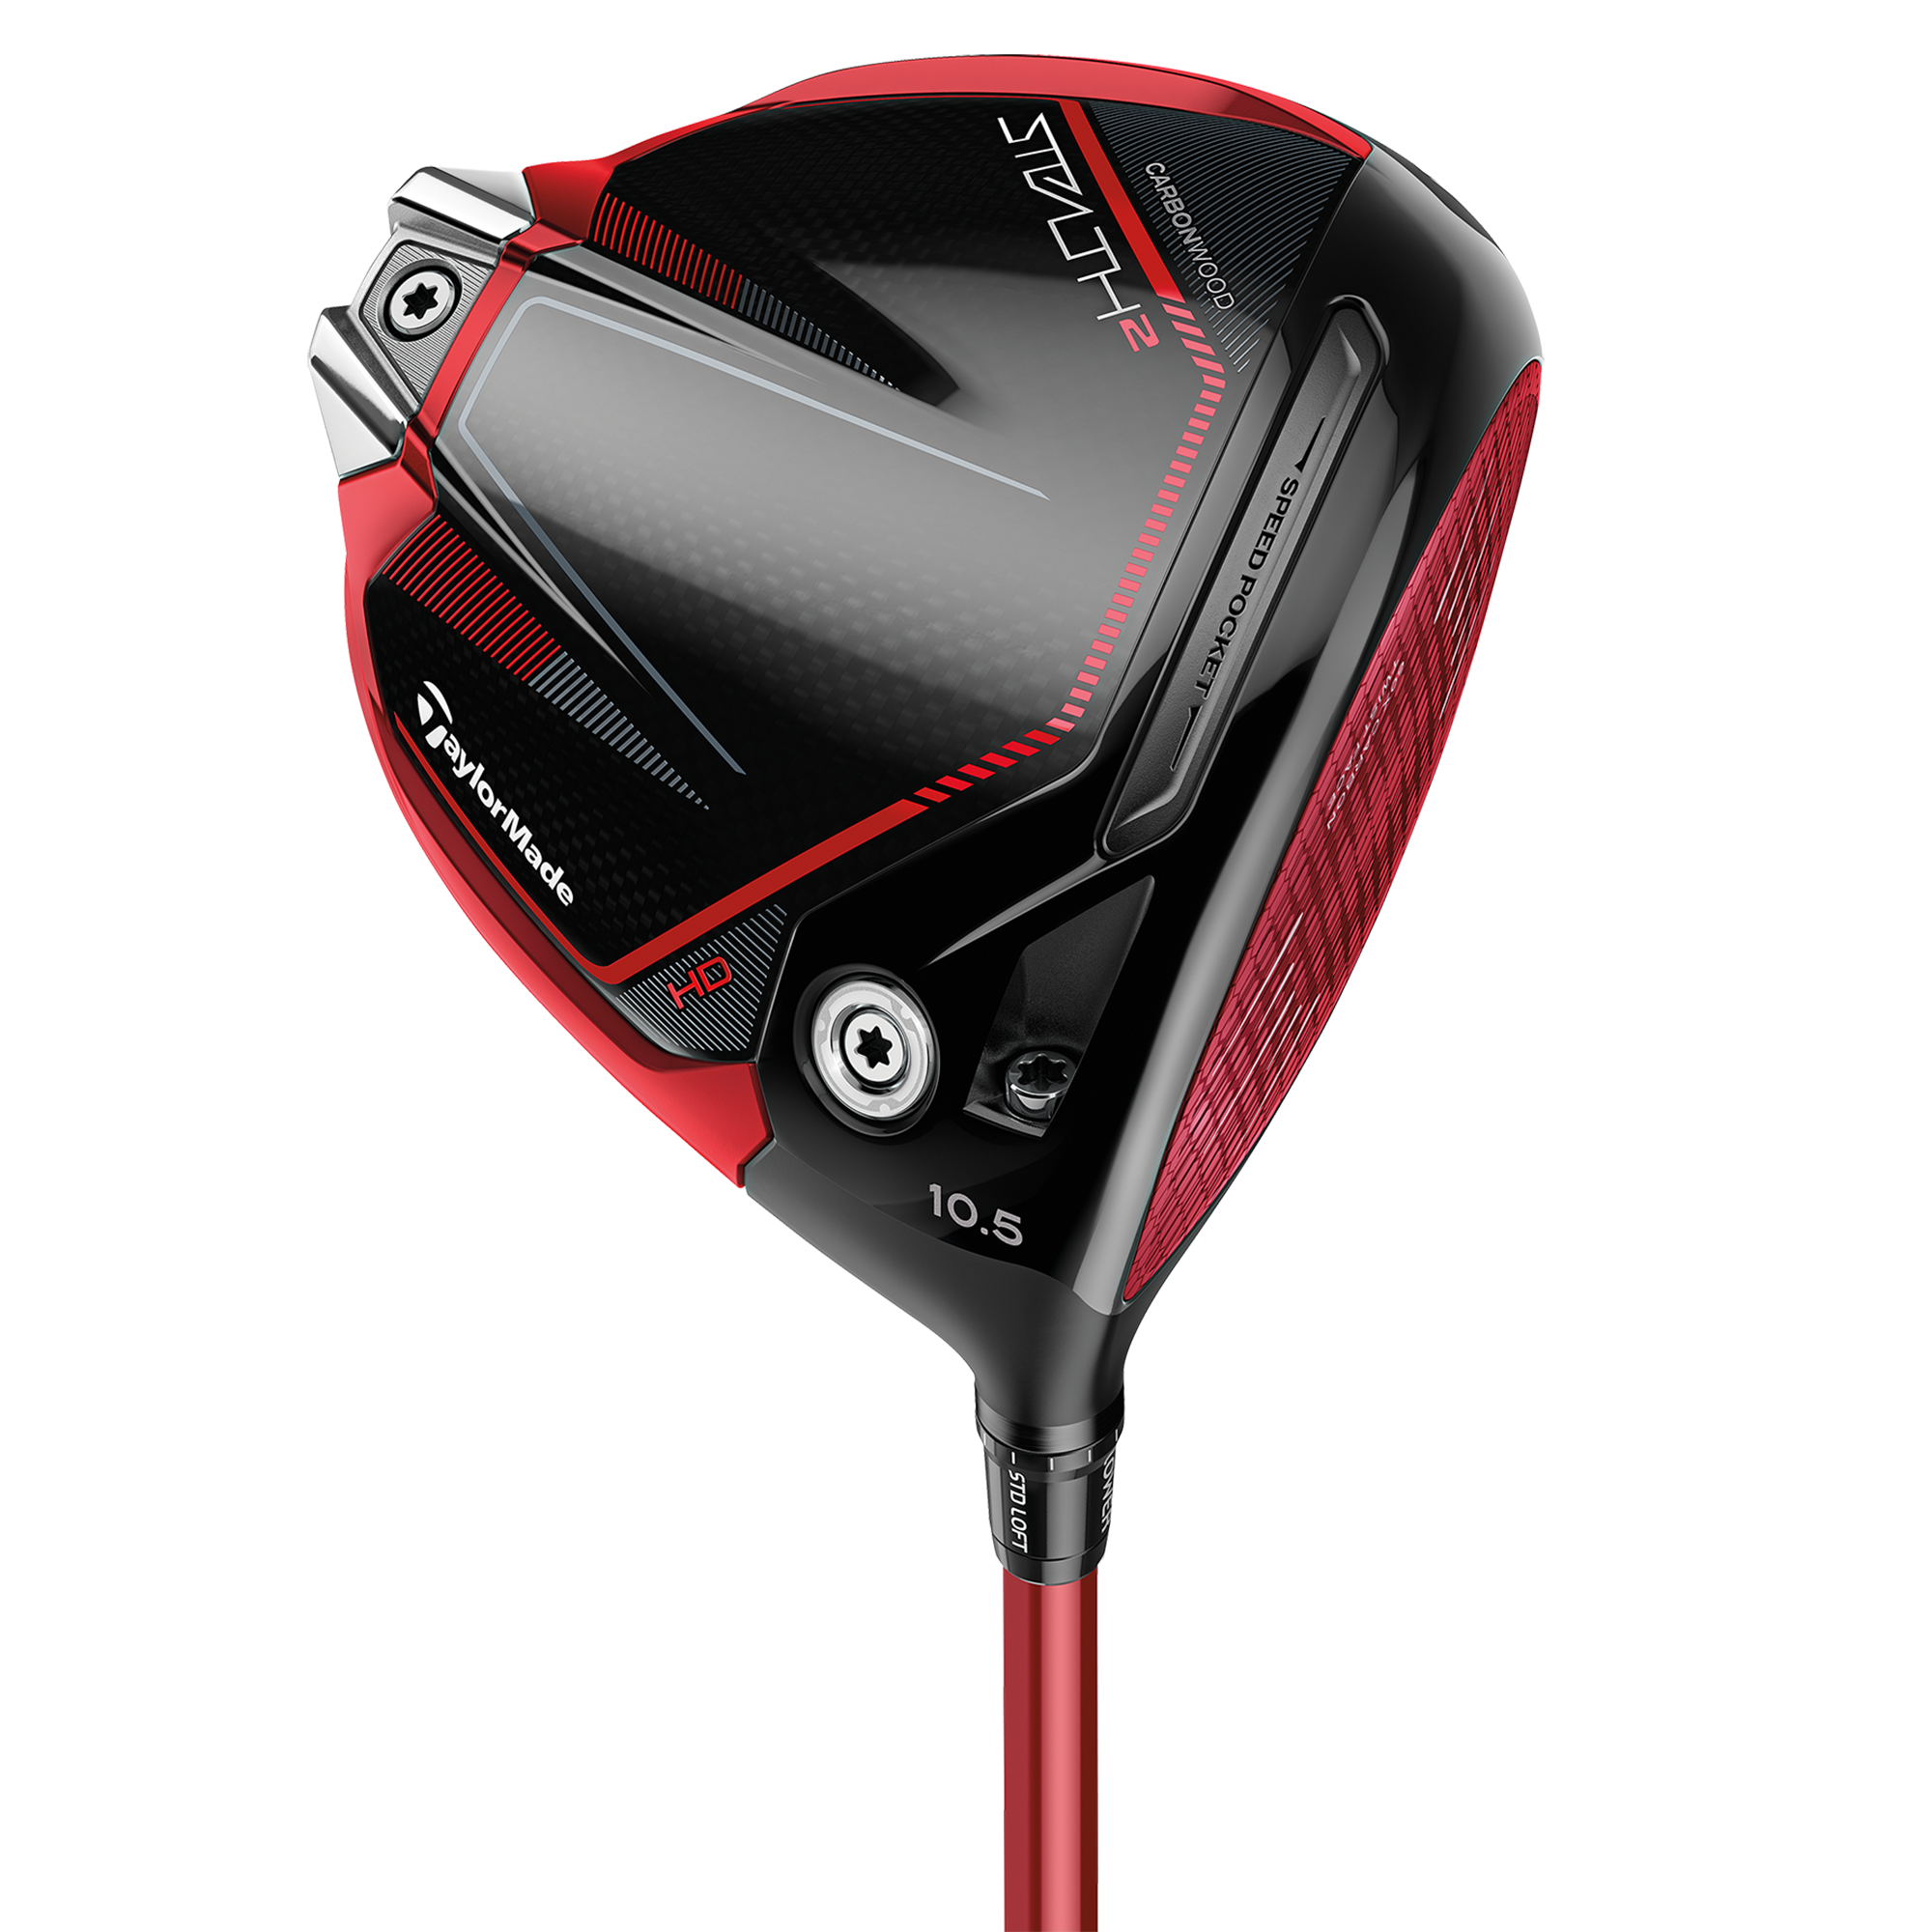 Stealth 2 High Draw Driver